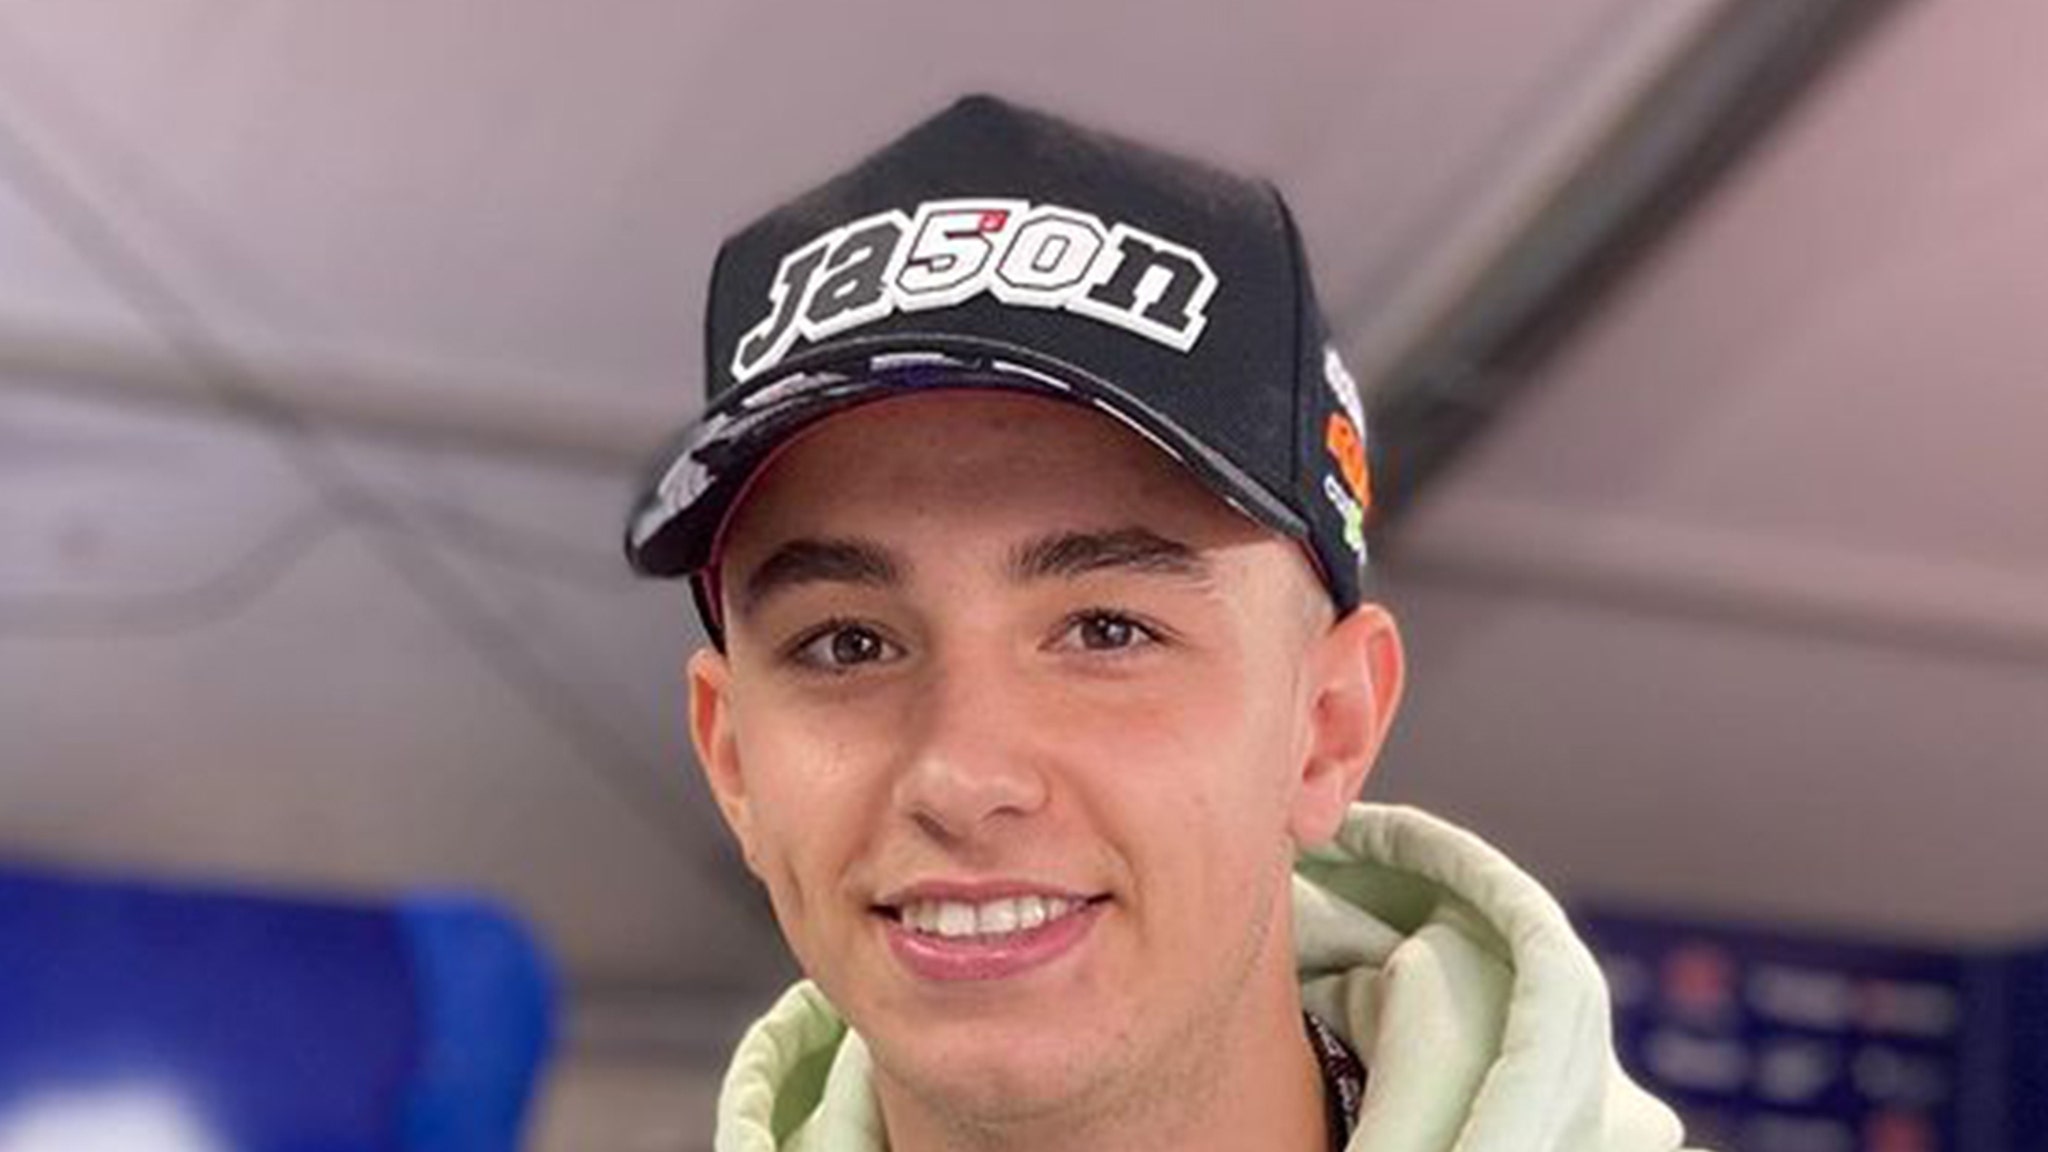 Jason Dupasquier dies from injuries sustained in Moto 3 qualifying accident